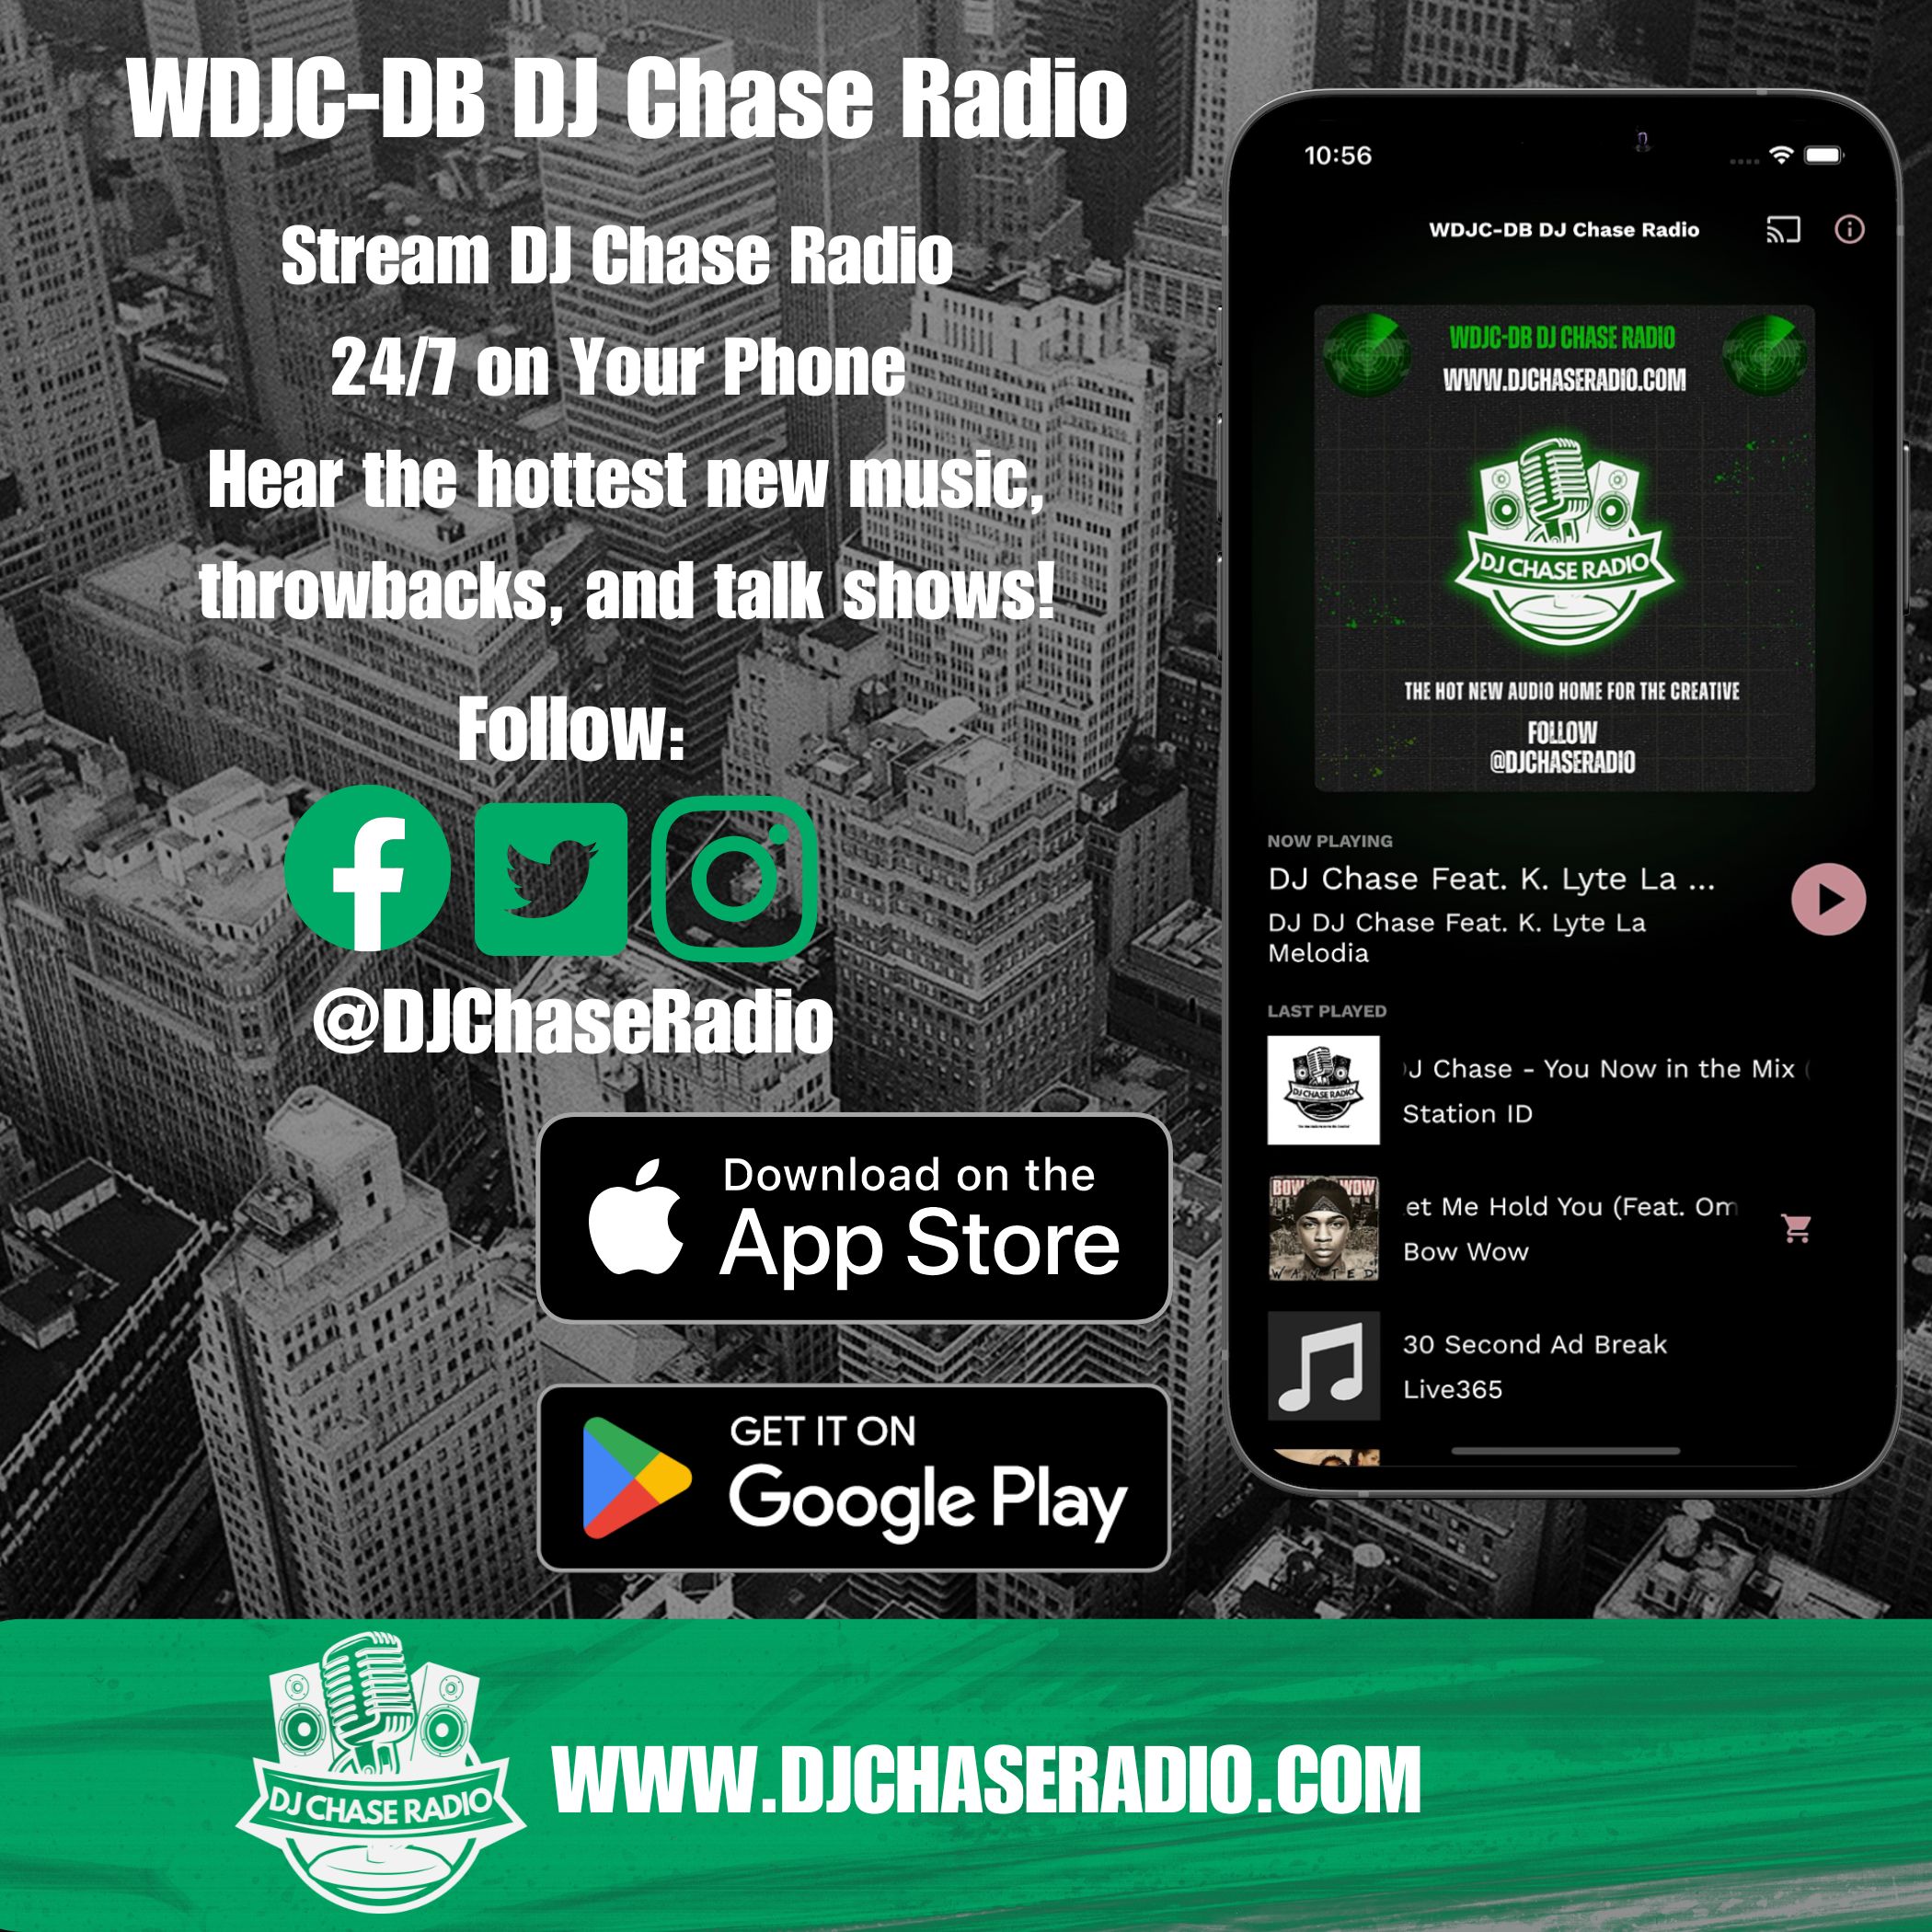 Art for HG Locks - You Are Now Tuned into WDJC-DB DJ Chase Radio by HG Locks